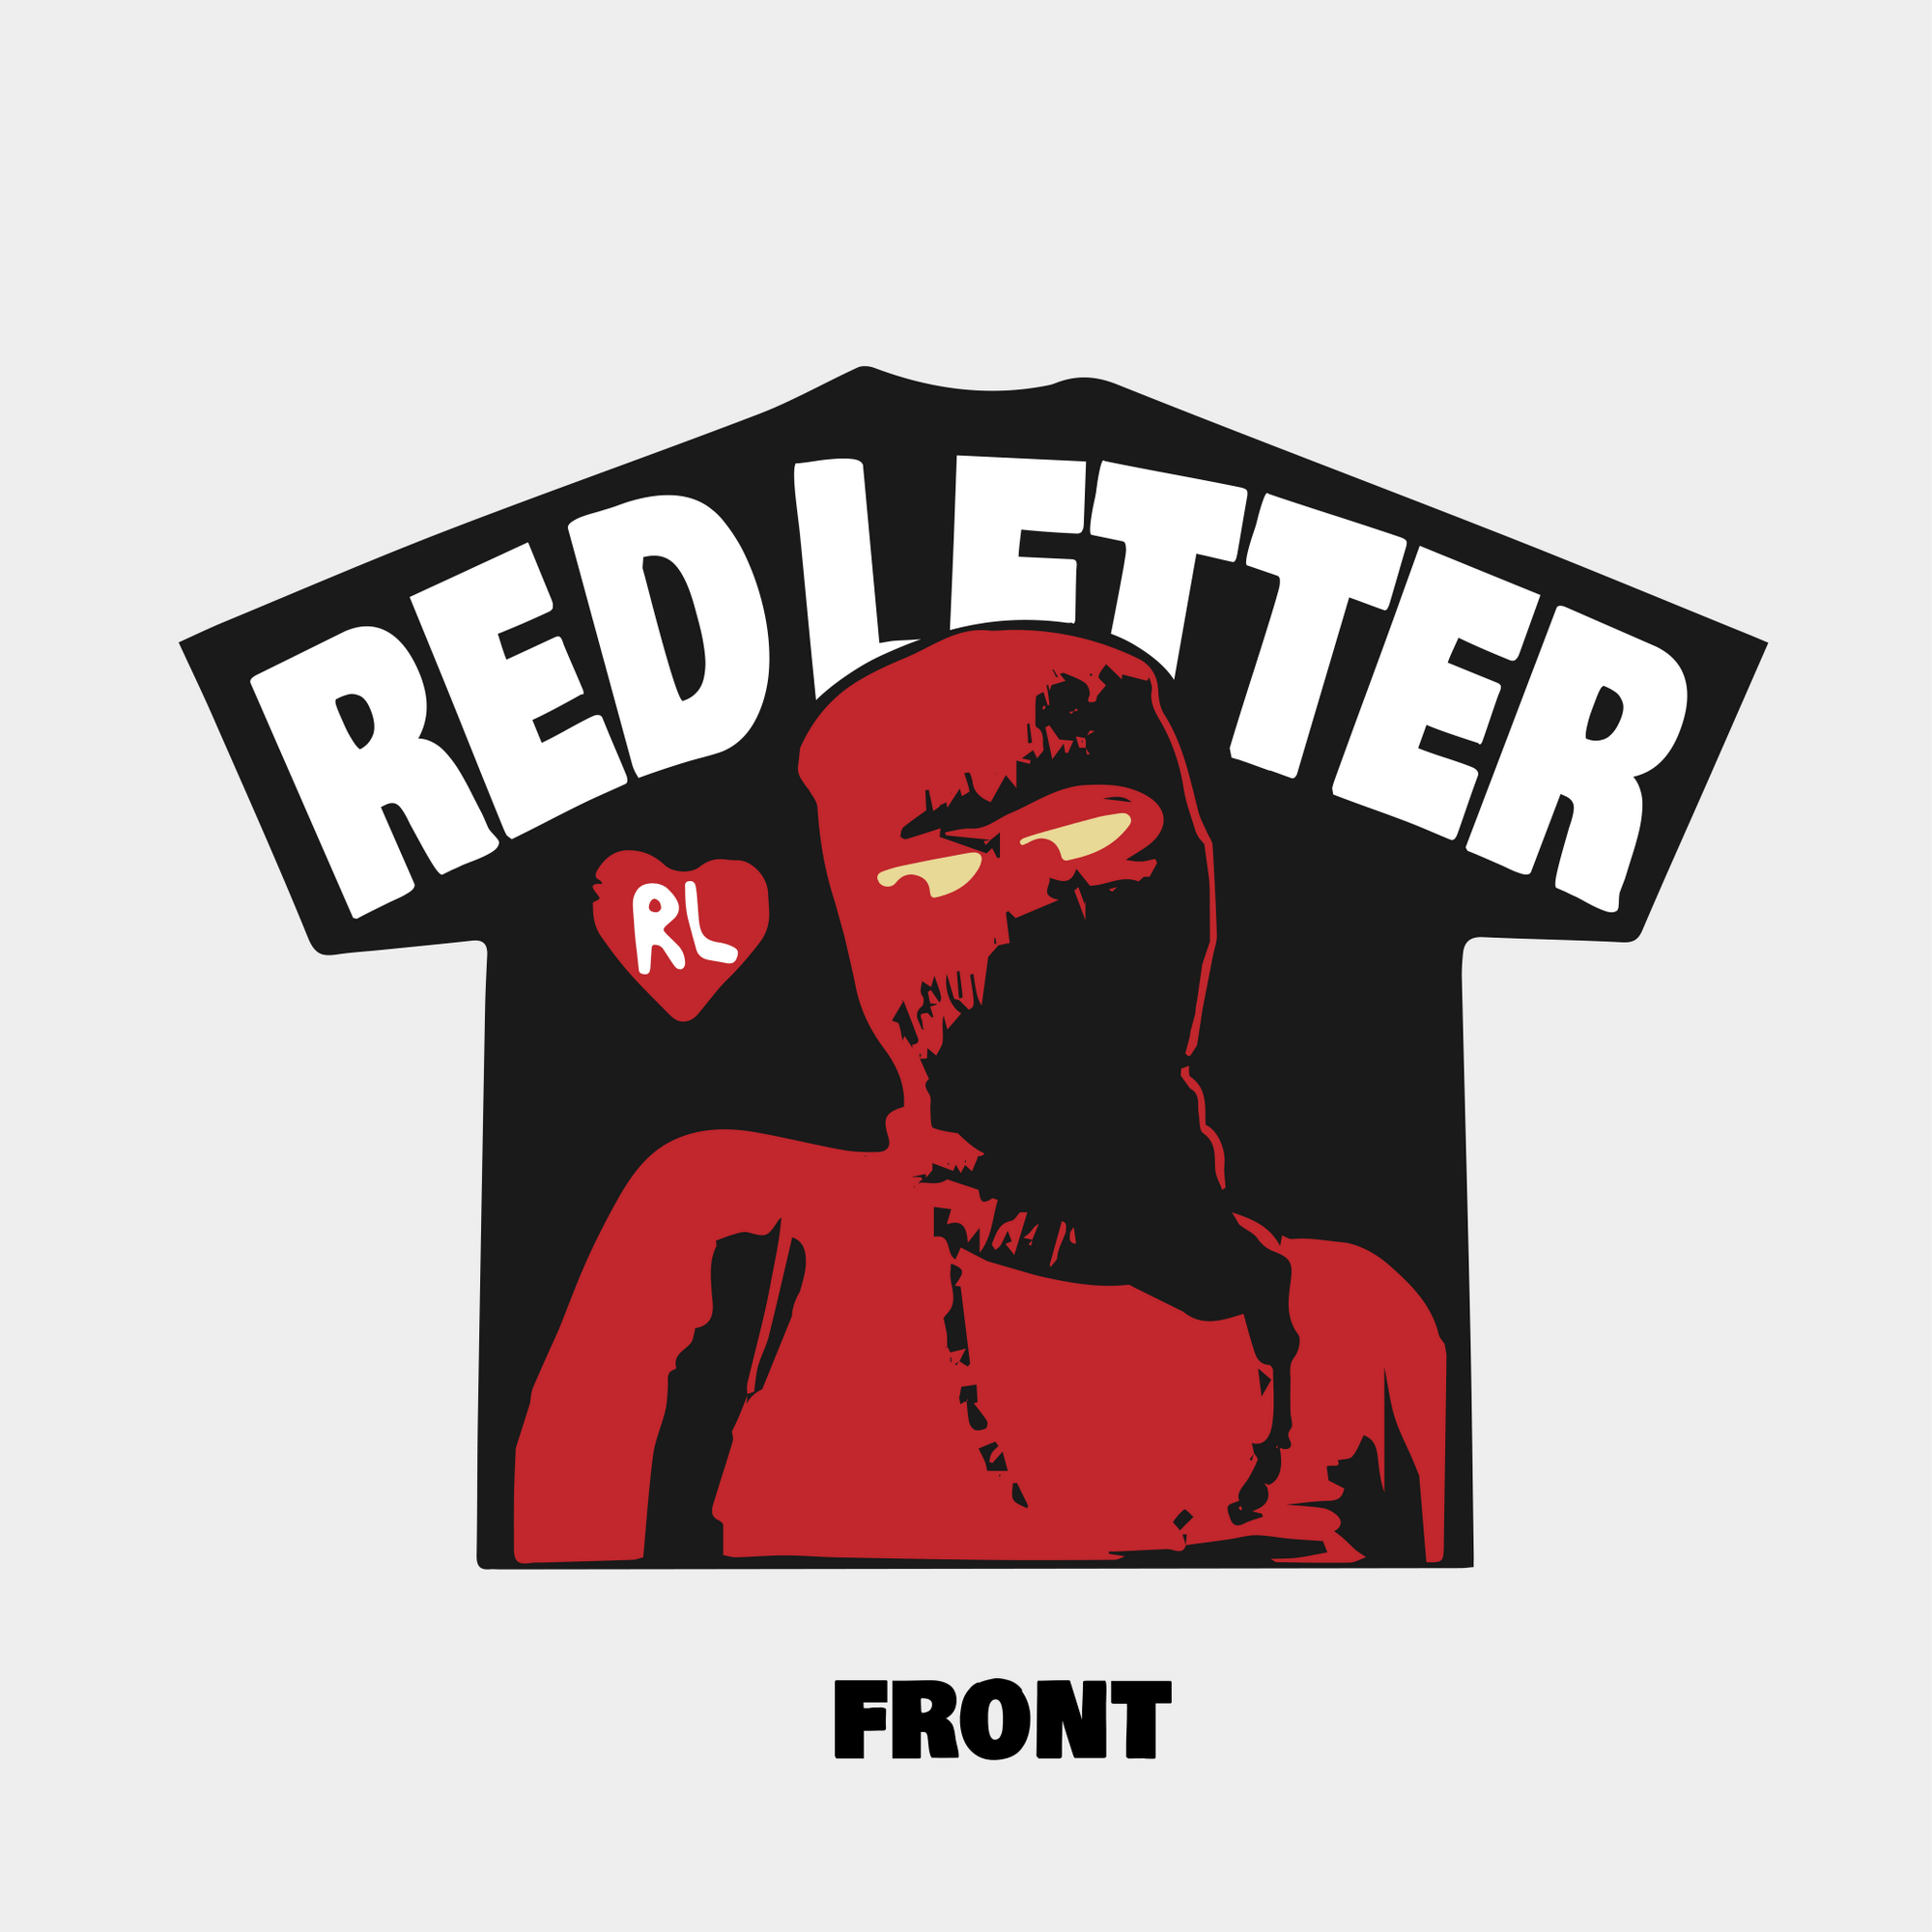 "Fred Shiesty" Tee - Black - RED LETTERS